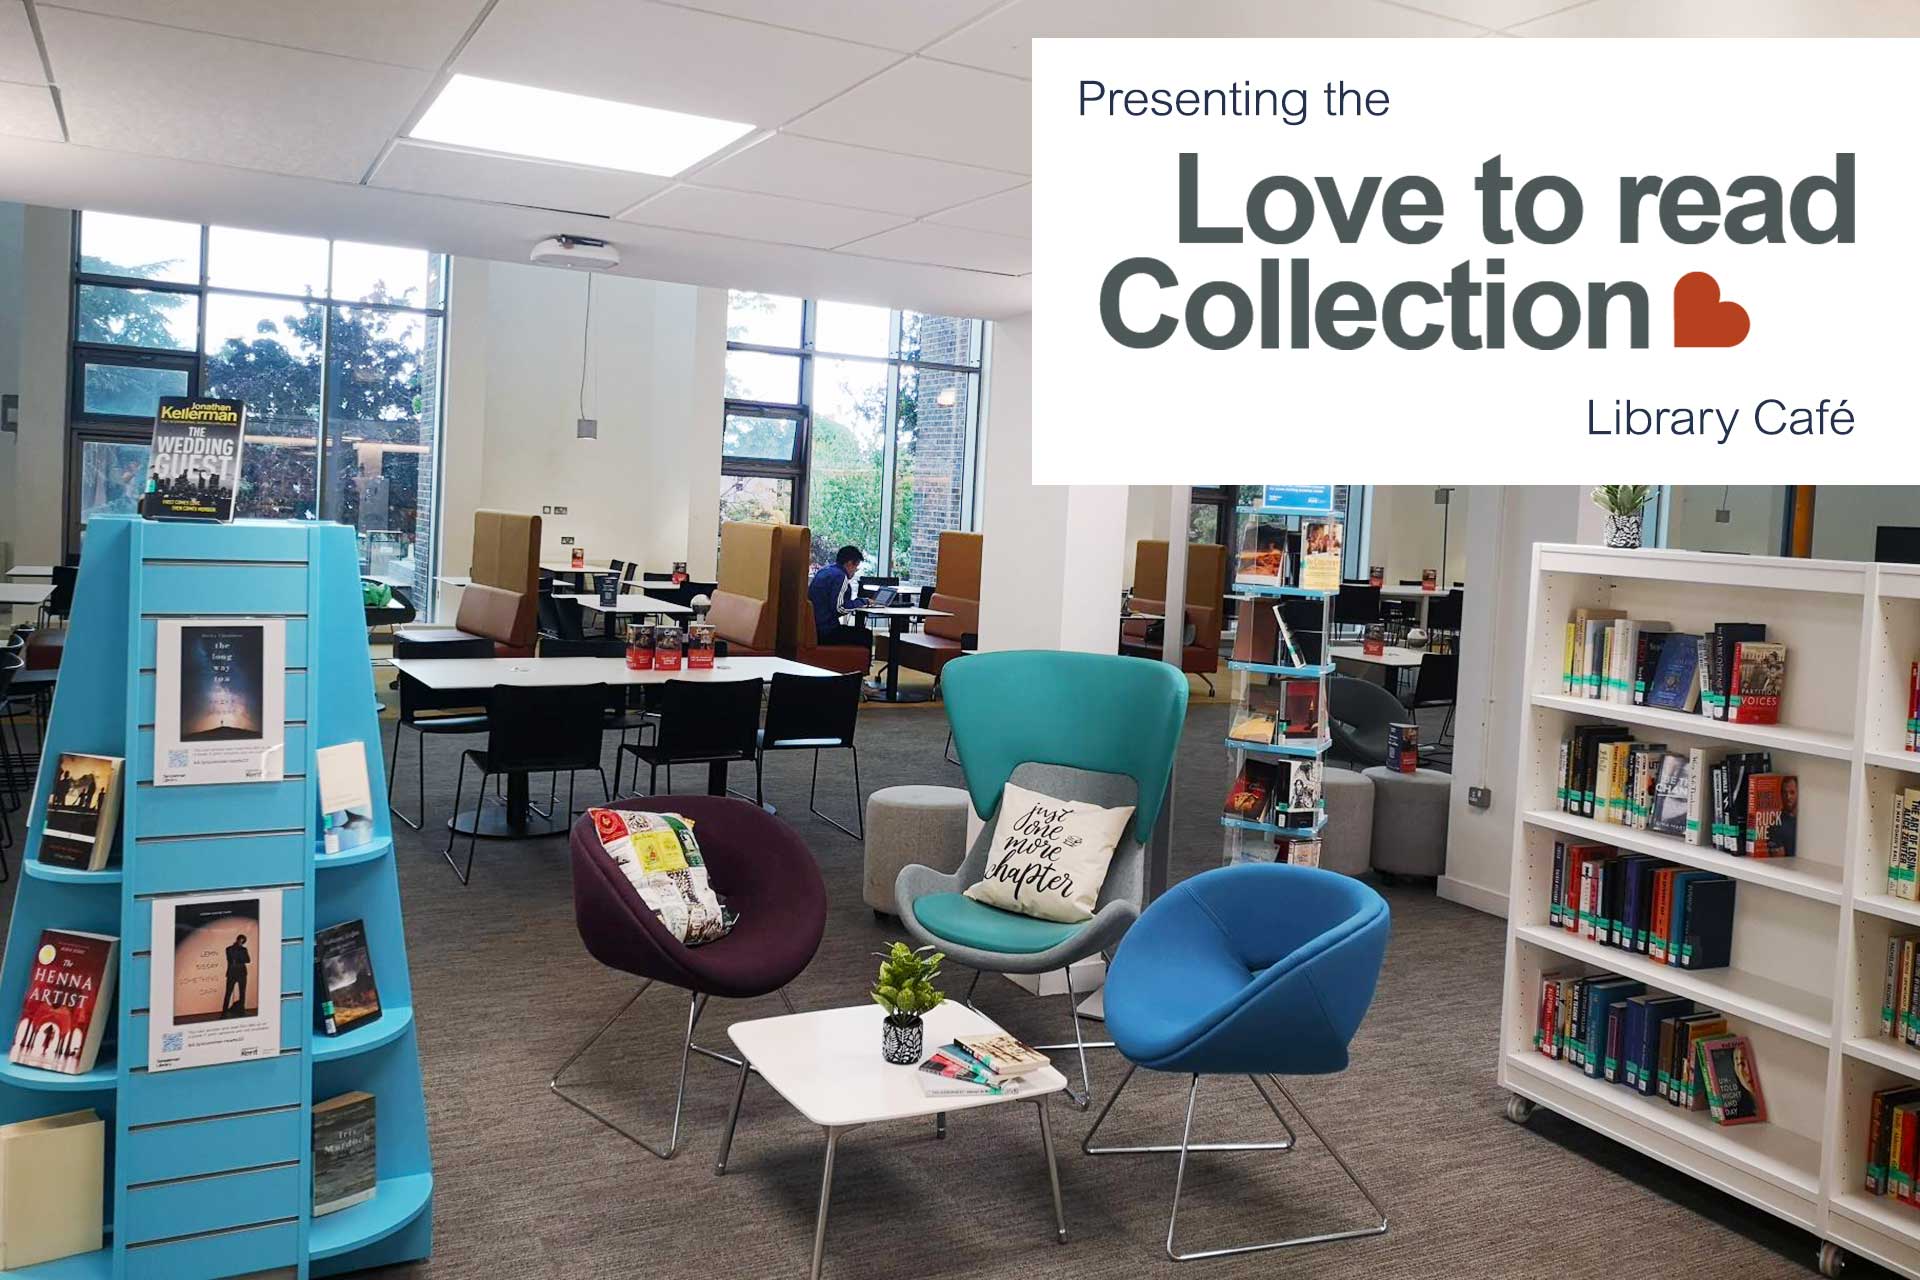 Presenting the Love to Read Collection in the Library Cafe: image of book display, comforable seating and low table